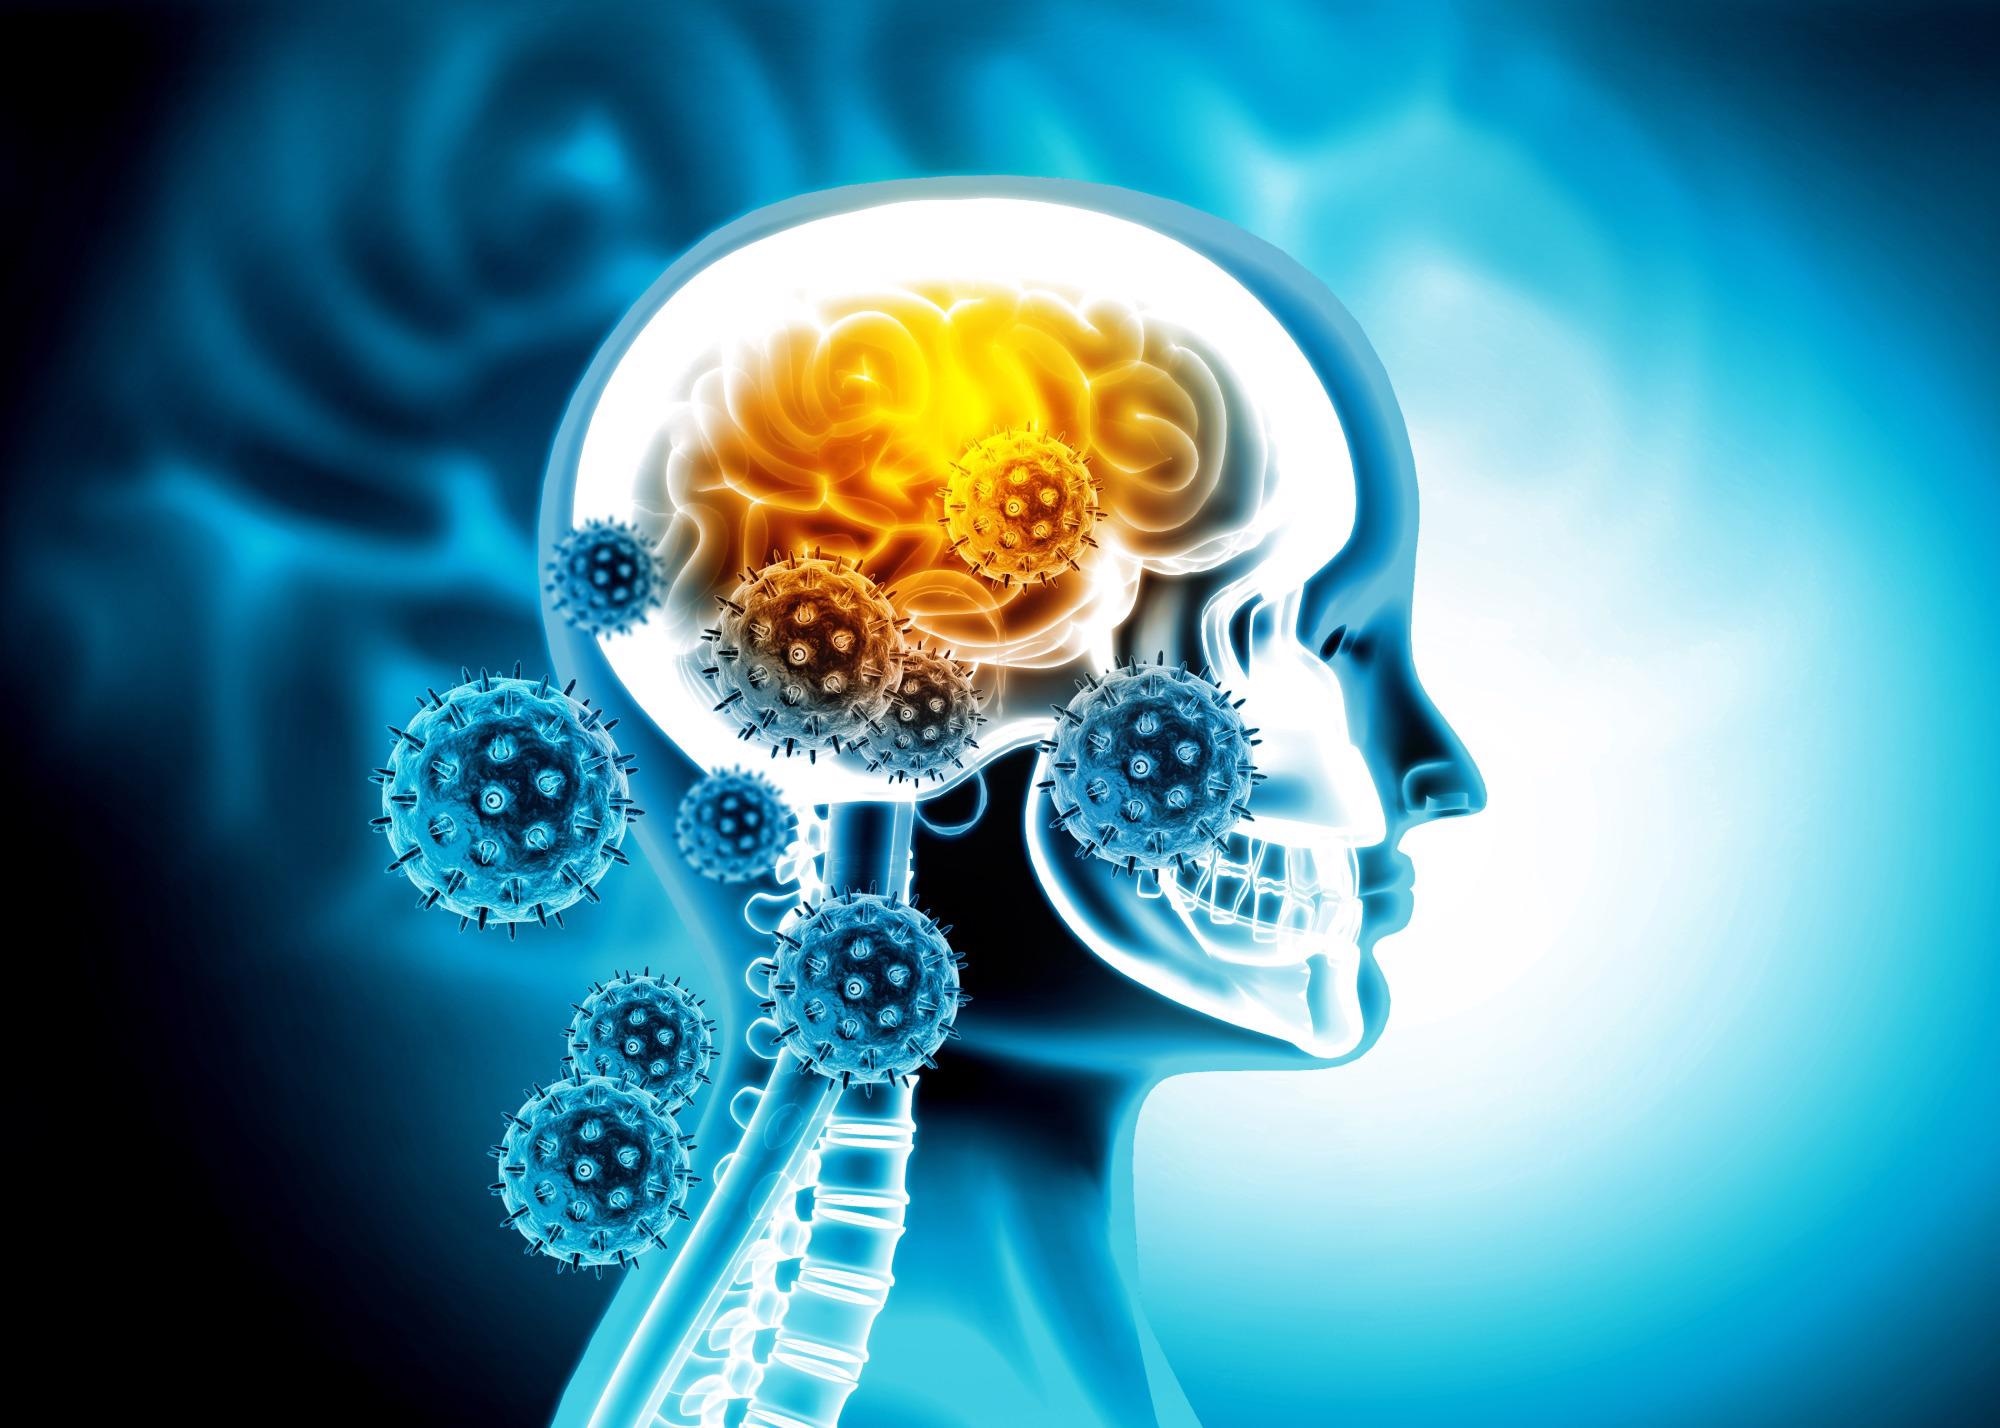 Study: SARS-CoV-2 is associated with changes in brain structure in UK Biobank. Image Credit: crystal light / Shutterstock